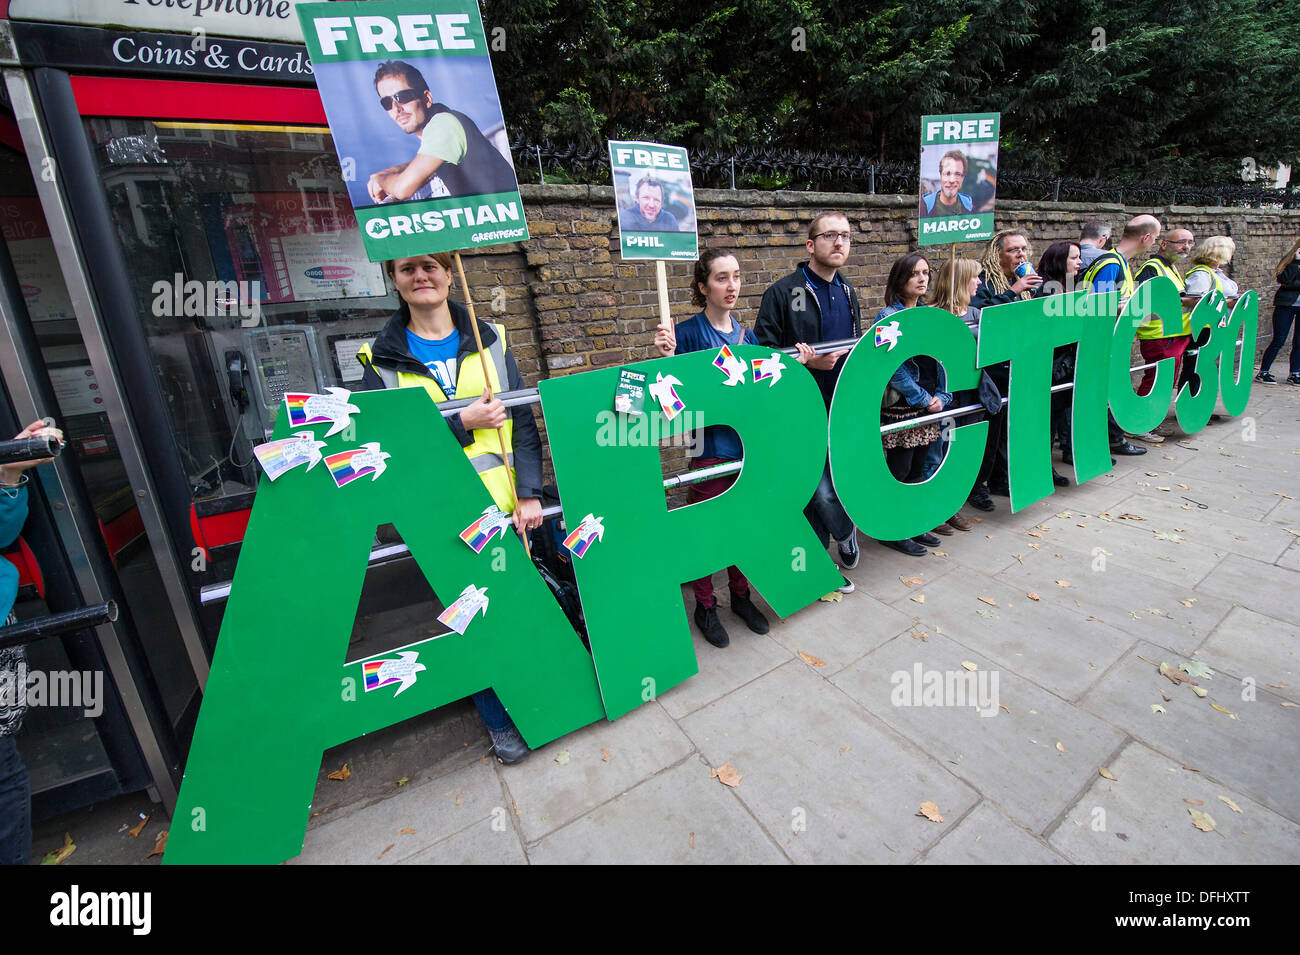 London, UK. 05th Oct, 2013. Greenpeace organize a global day of solidarity in support of the Arctic 30 who have been charged with piracy by the Russian state prosecutor. According to Greenpeace over 800,000 have already been written to Russian Embassies to demand their immediate release. Today protestors are encouraged to  write messages of solidarity on paper doves, which will be sent to those detained in Murmansk. Russian Embassy, Kensington Palace Gardens, London, UK, 5th October 2013 Credit:  Guy Bell/Alamy Live News Stock Photo